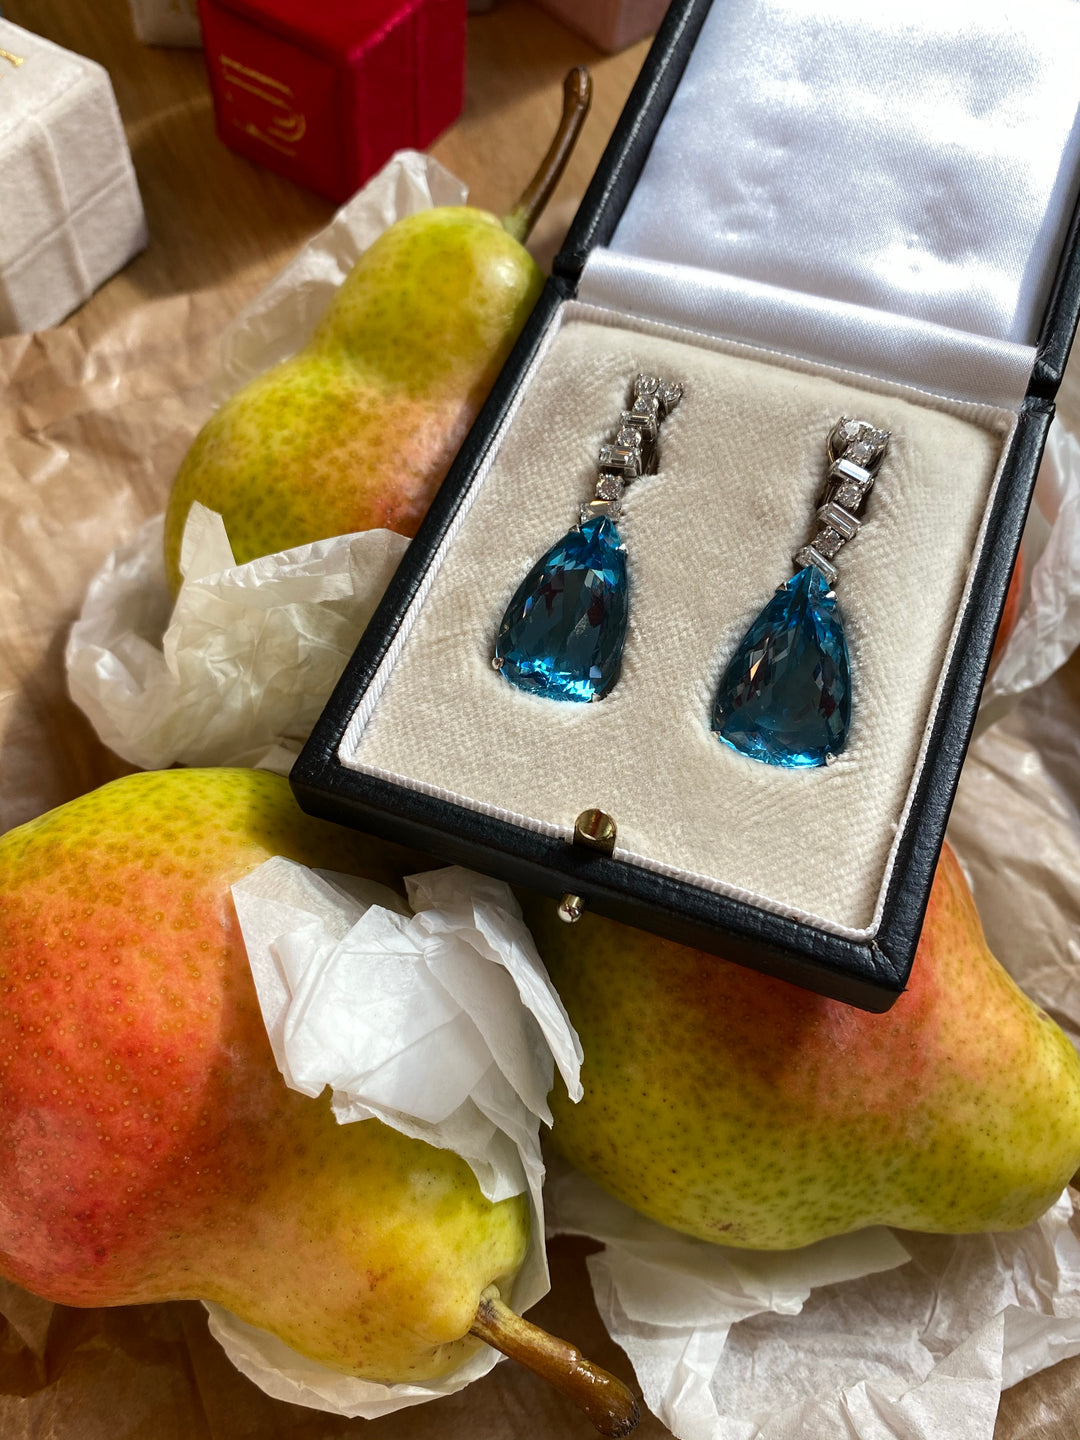 Pear Cut Aquamarine and Diamond Vintage Drop Earrings in White Gold